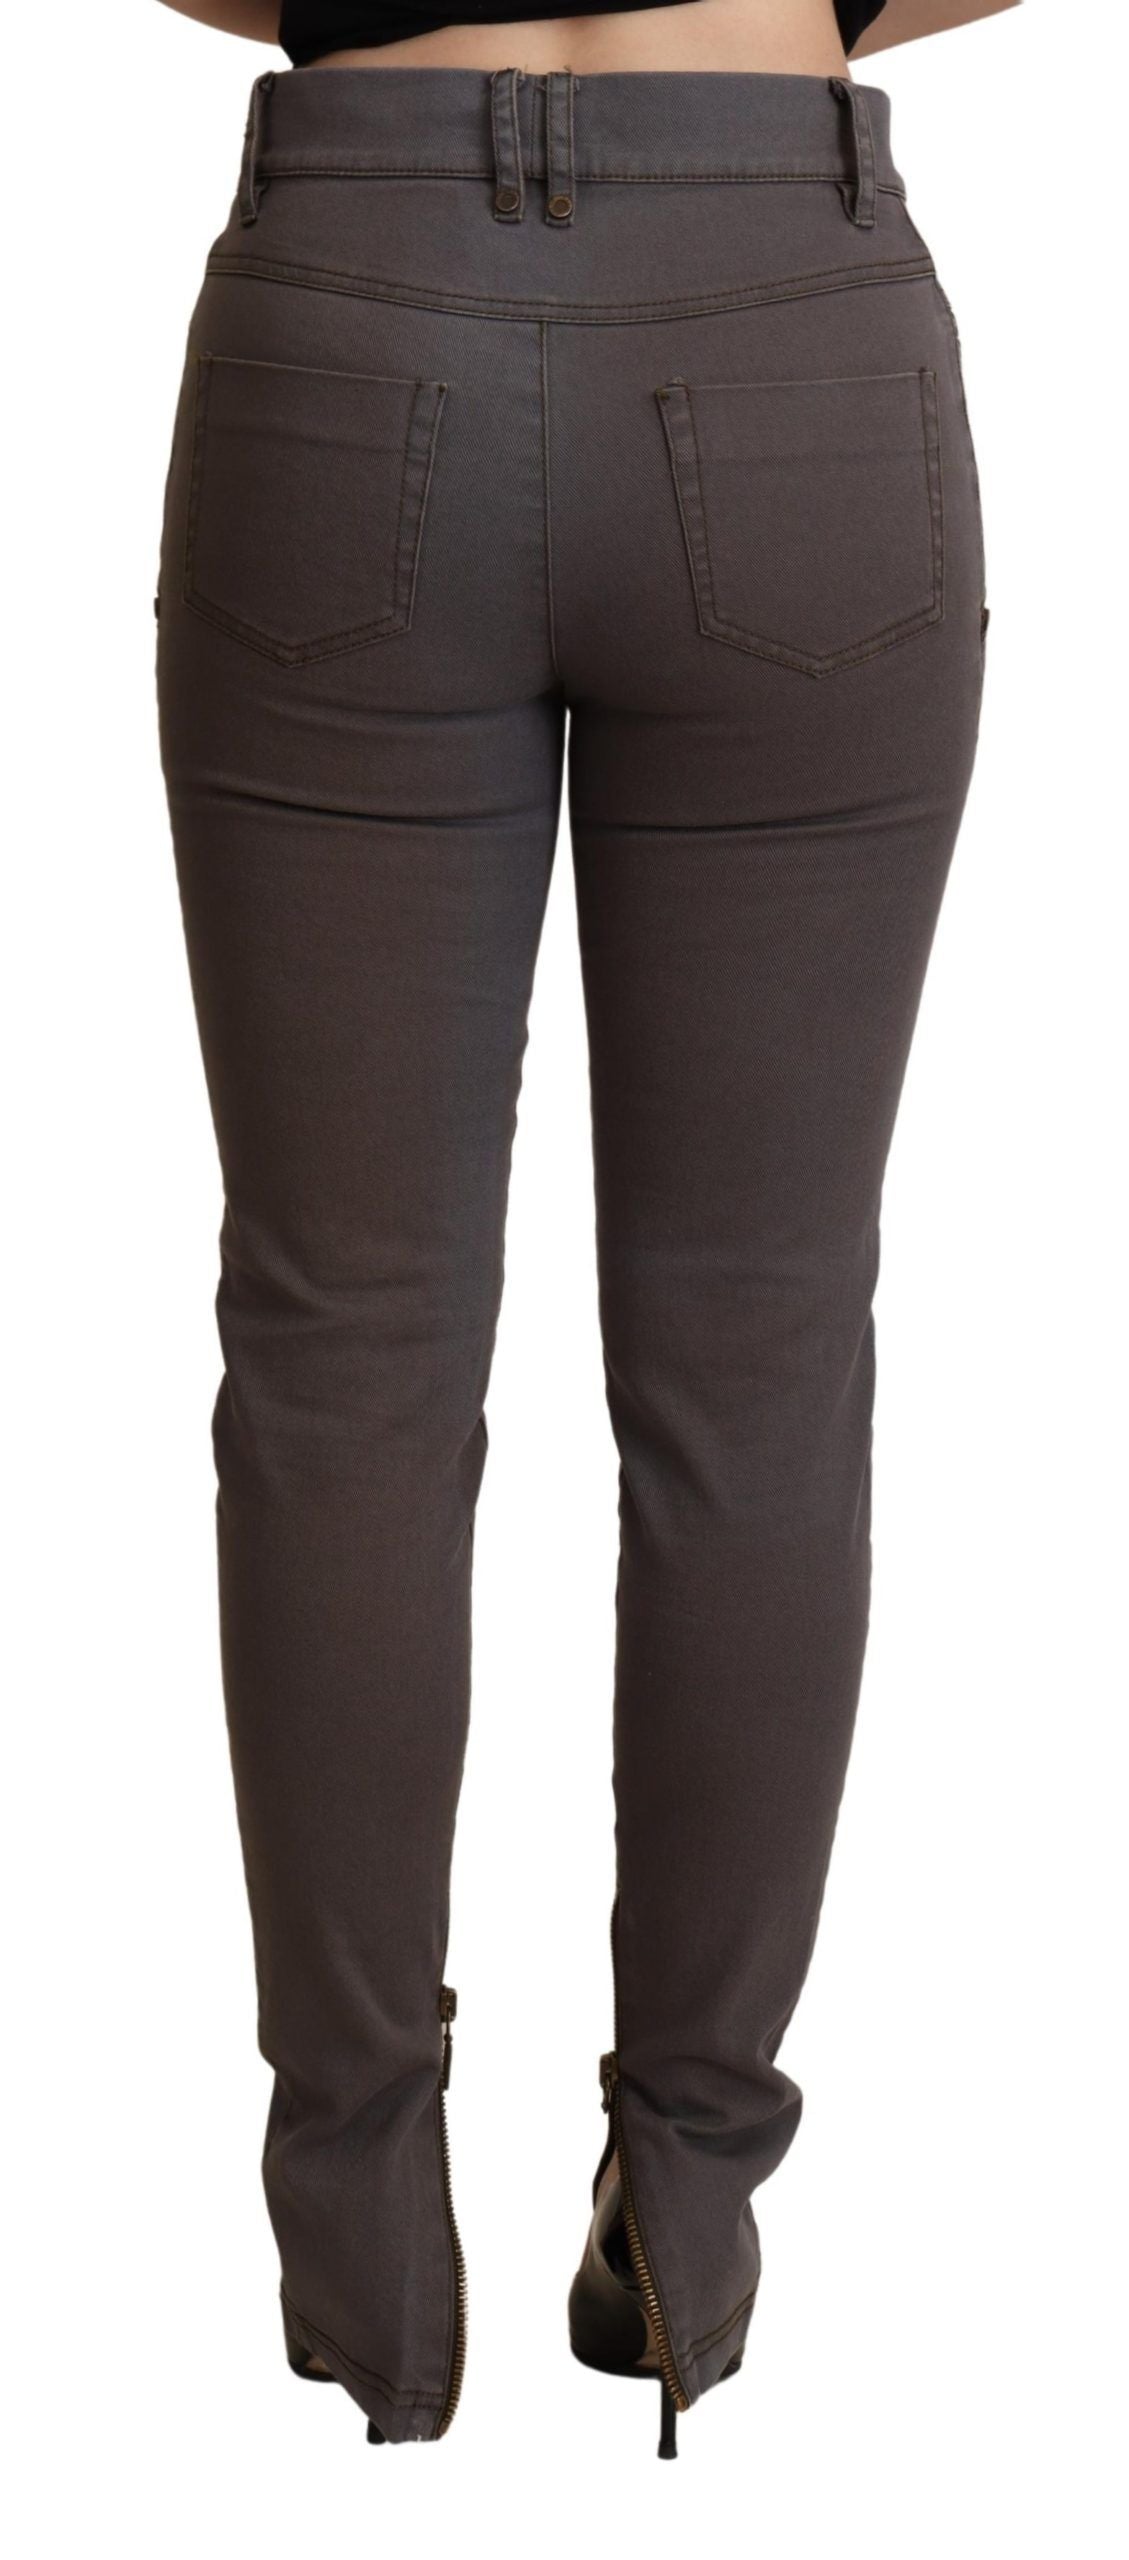 Brown Cotton Stretch Skinny Denim Jeans - Designed by PLEIN SUD Available to Buy at a Discounted Price on Moon Behind The Hill Online Designer Discount Store